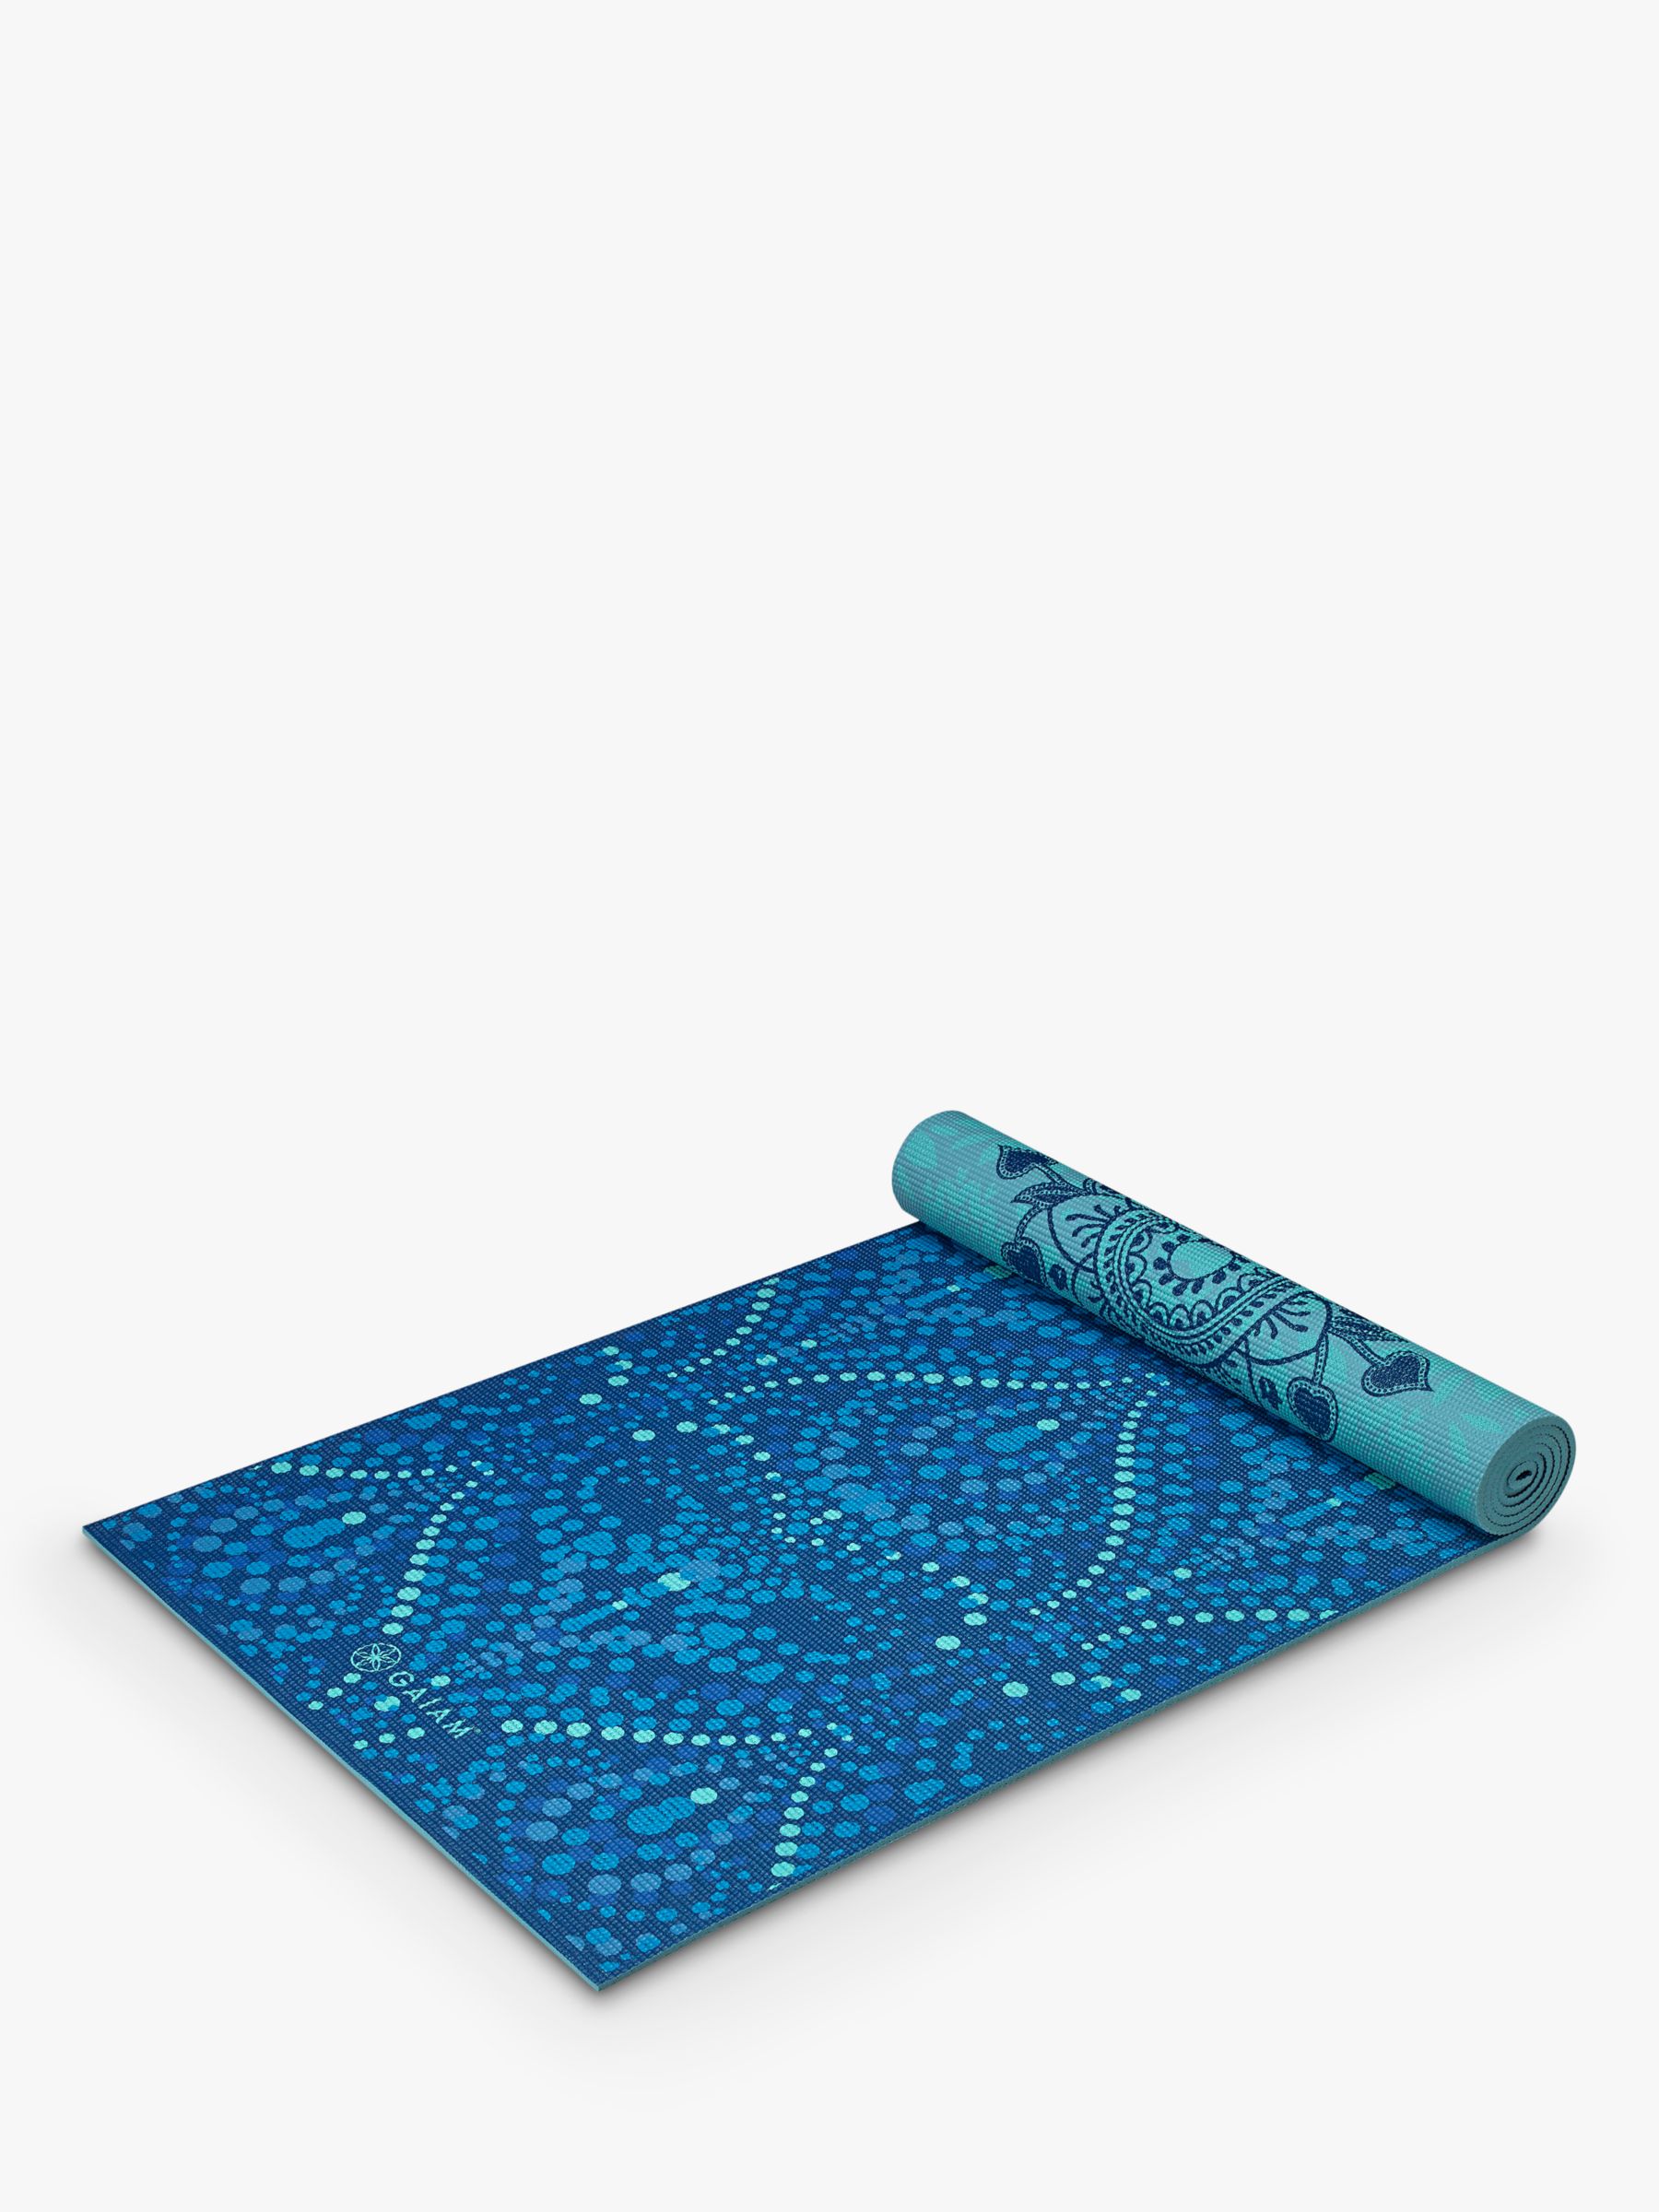 MYSTIC SKY Reversible Premium Yoga Mat Shades of blue with pattern